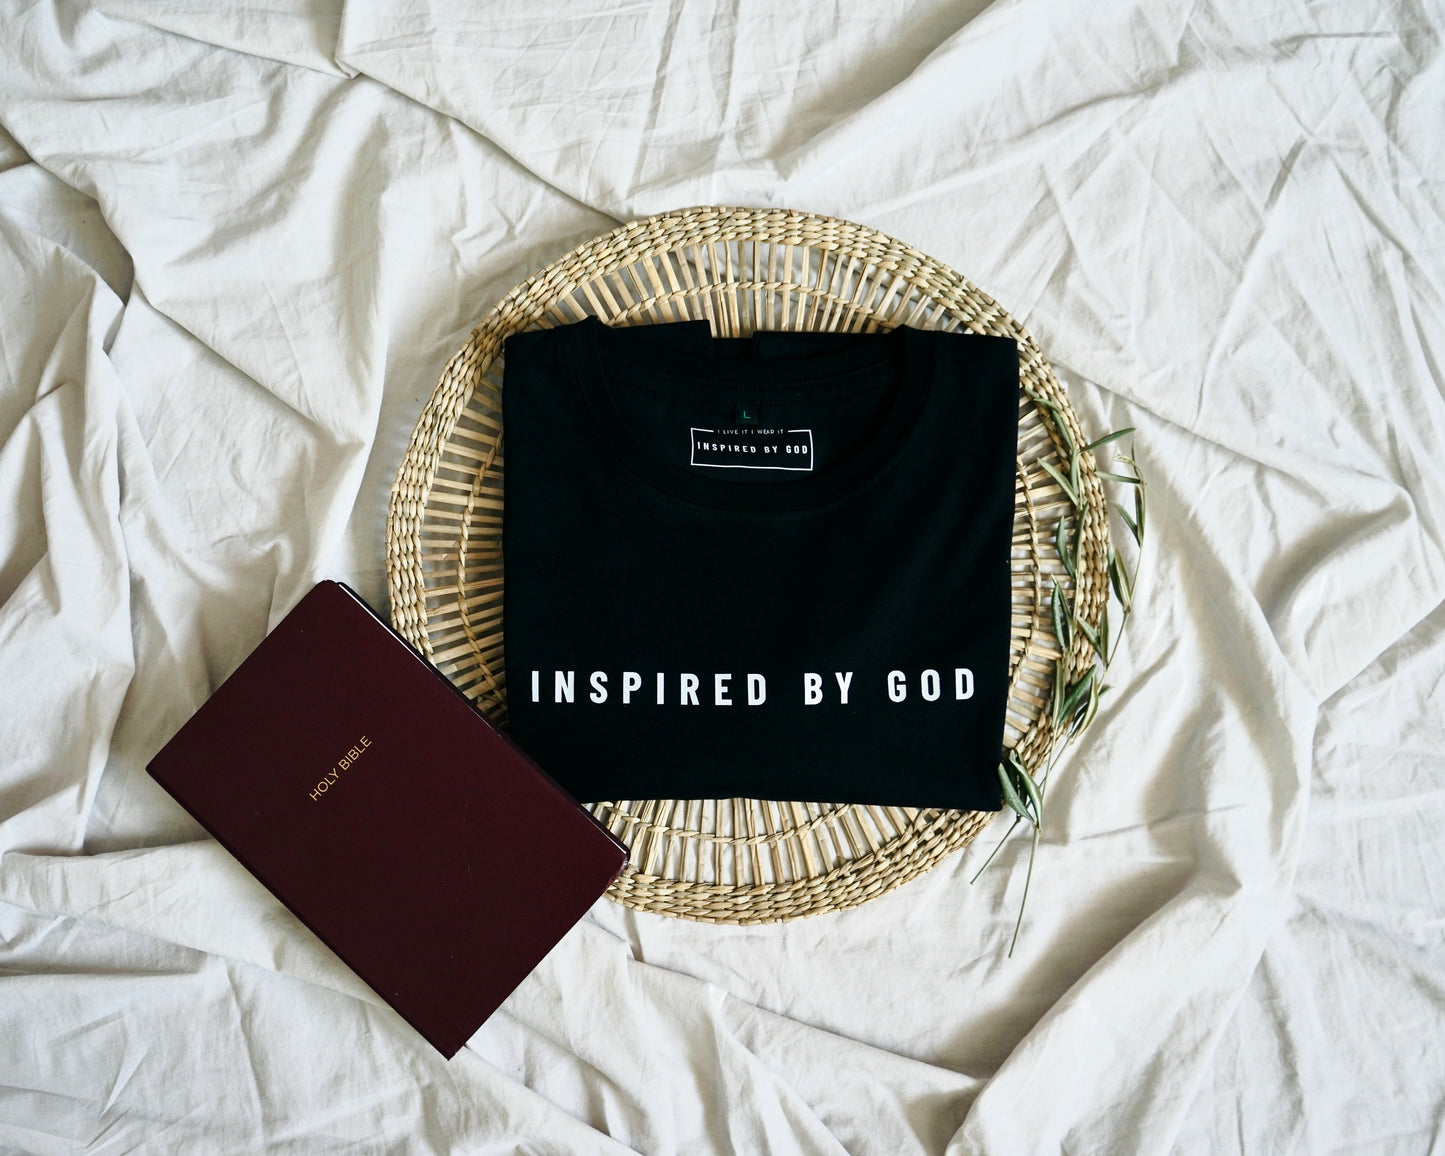 "Inspired by God" - black tee